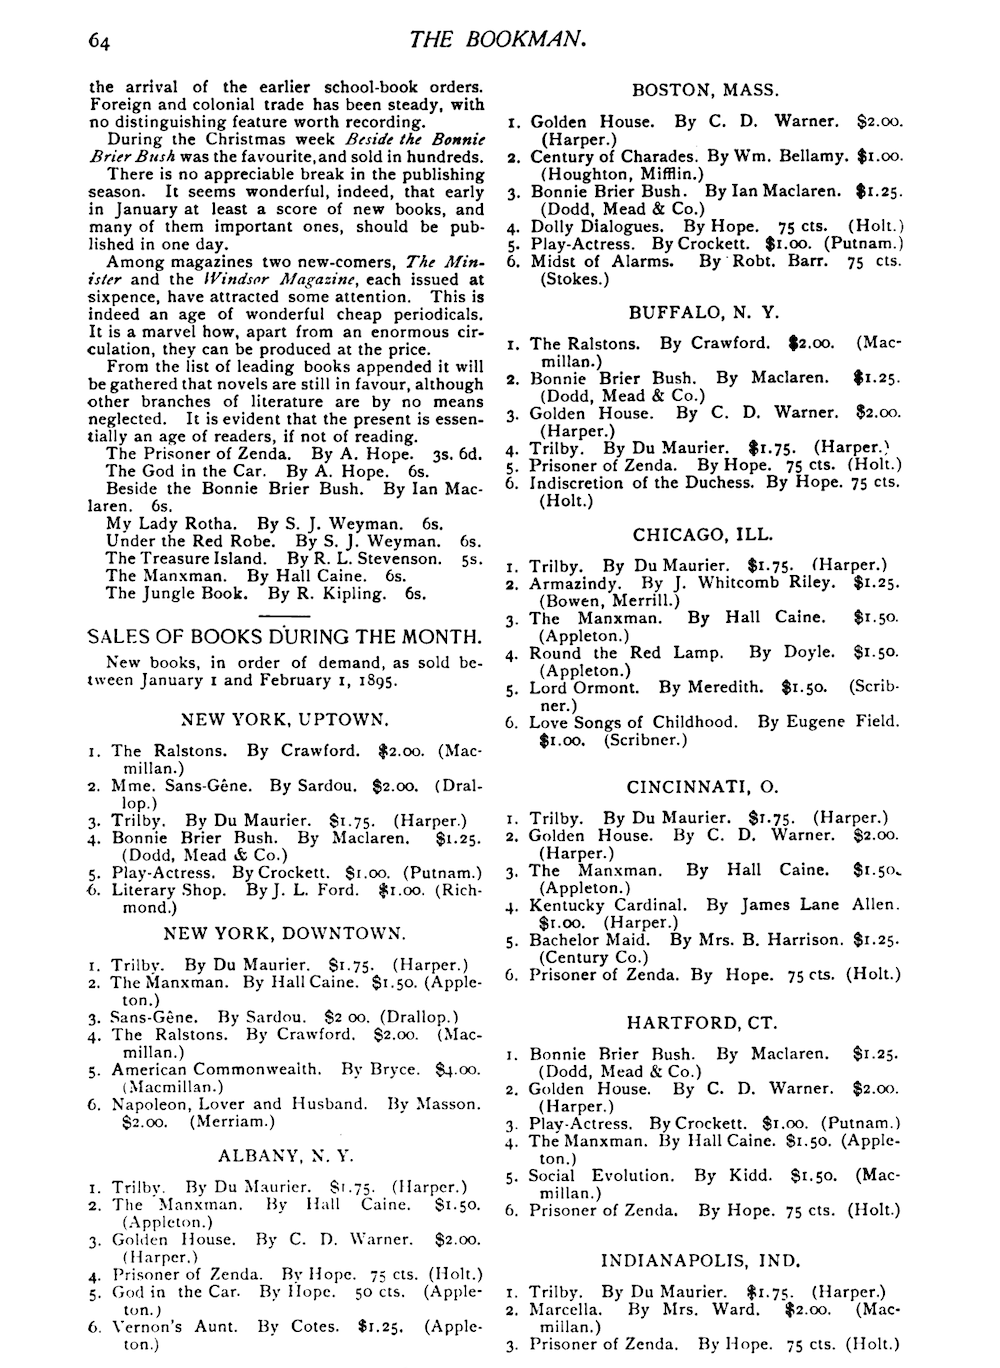 Page 64 of the first issue of the Bookman, showing the best-seller lists.